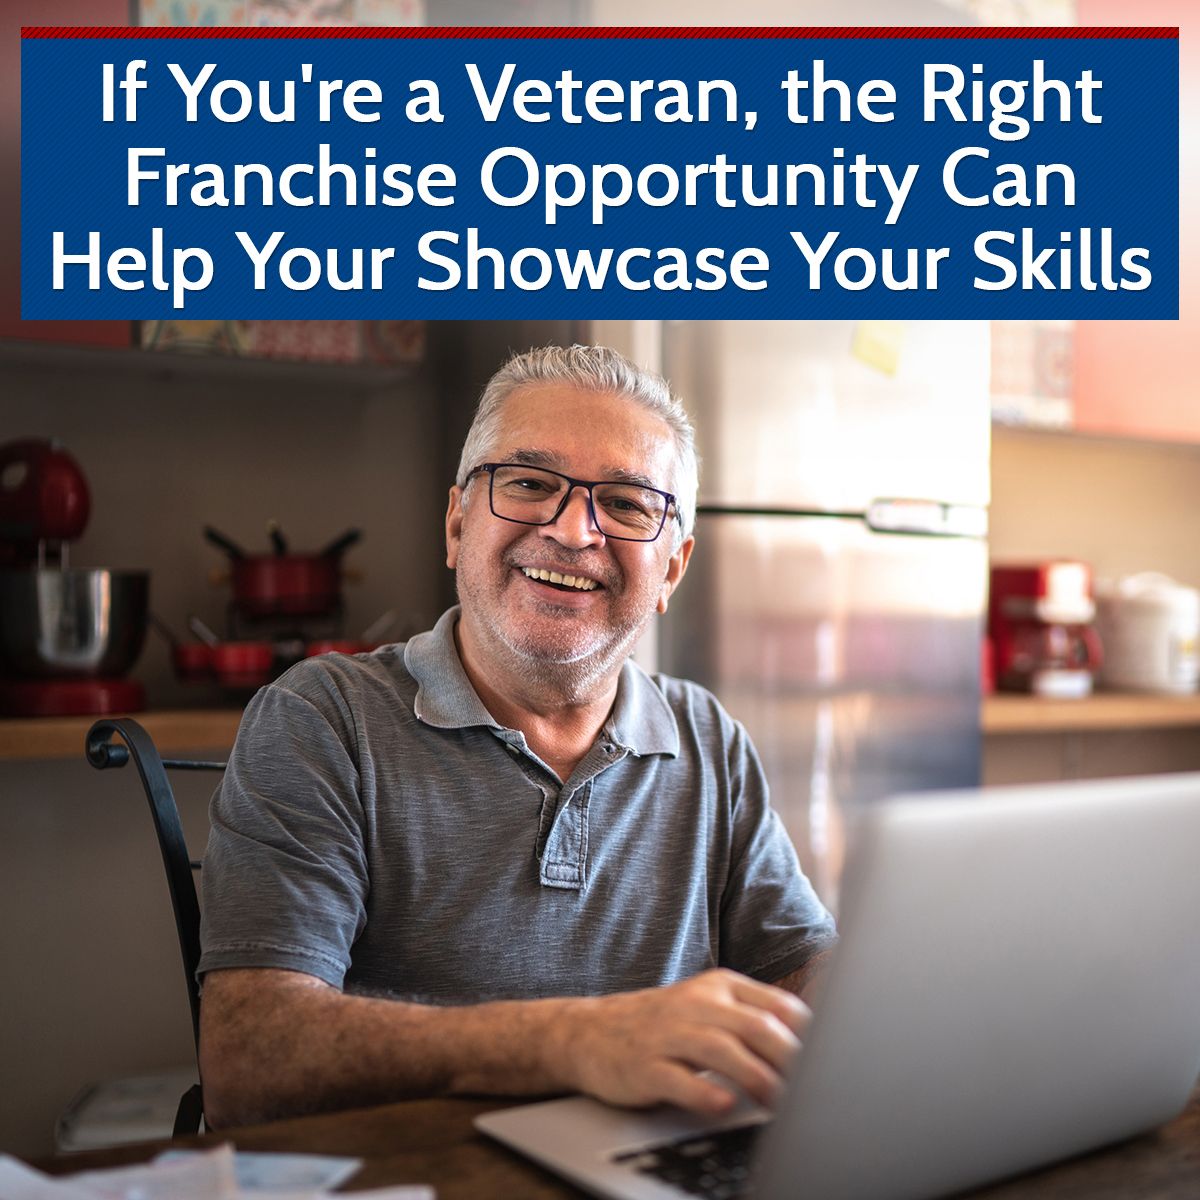 If You're a Veteran, the Right Franchise Opportunity Can Help Your Showcase Your Skills